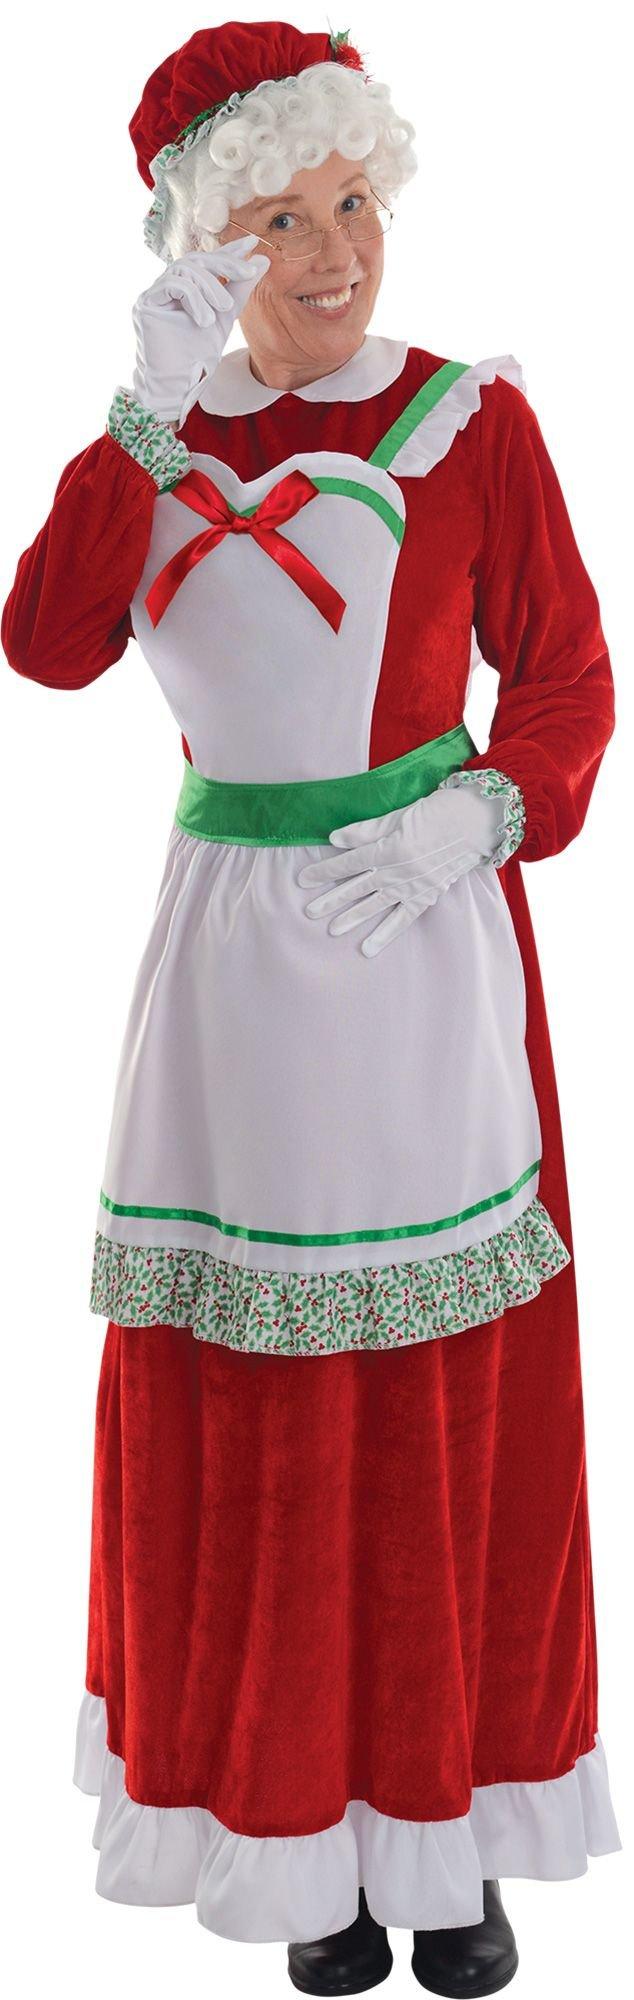 Mrs. Santa Claus Costume for Adults | Party City